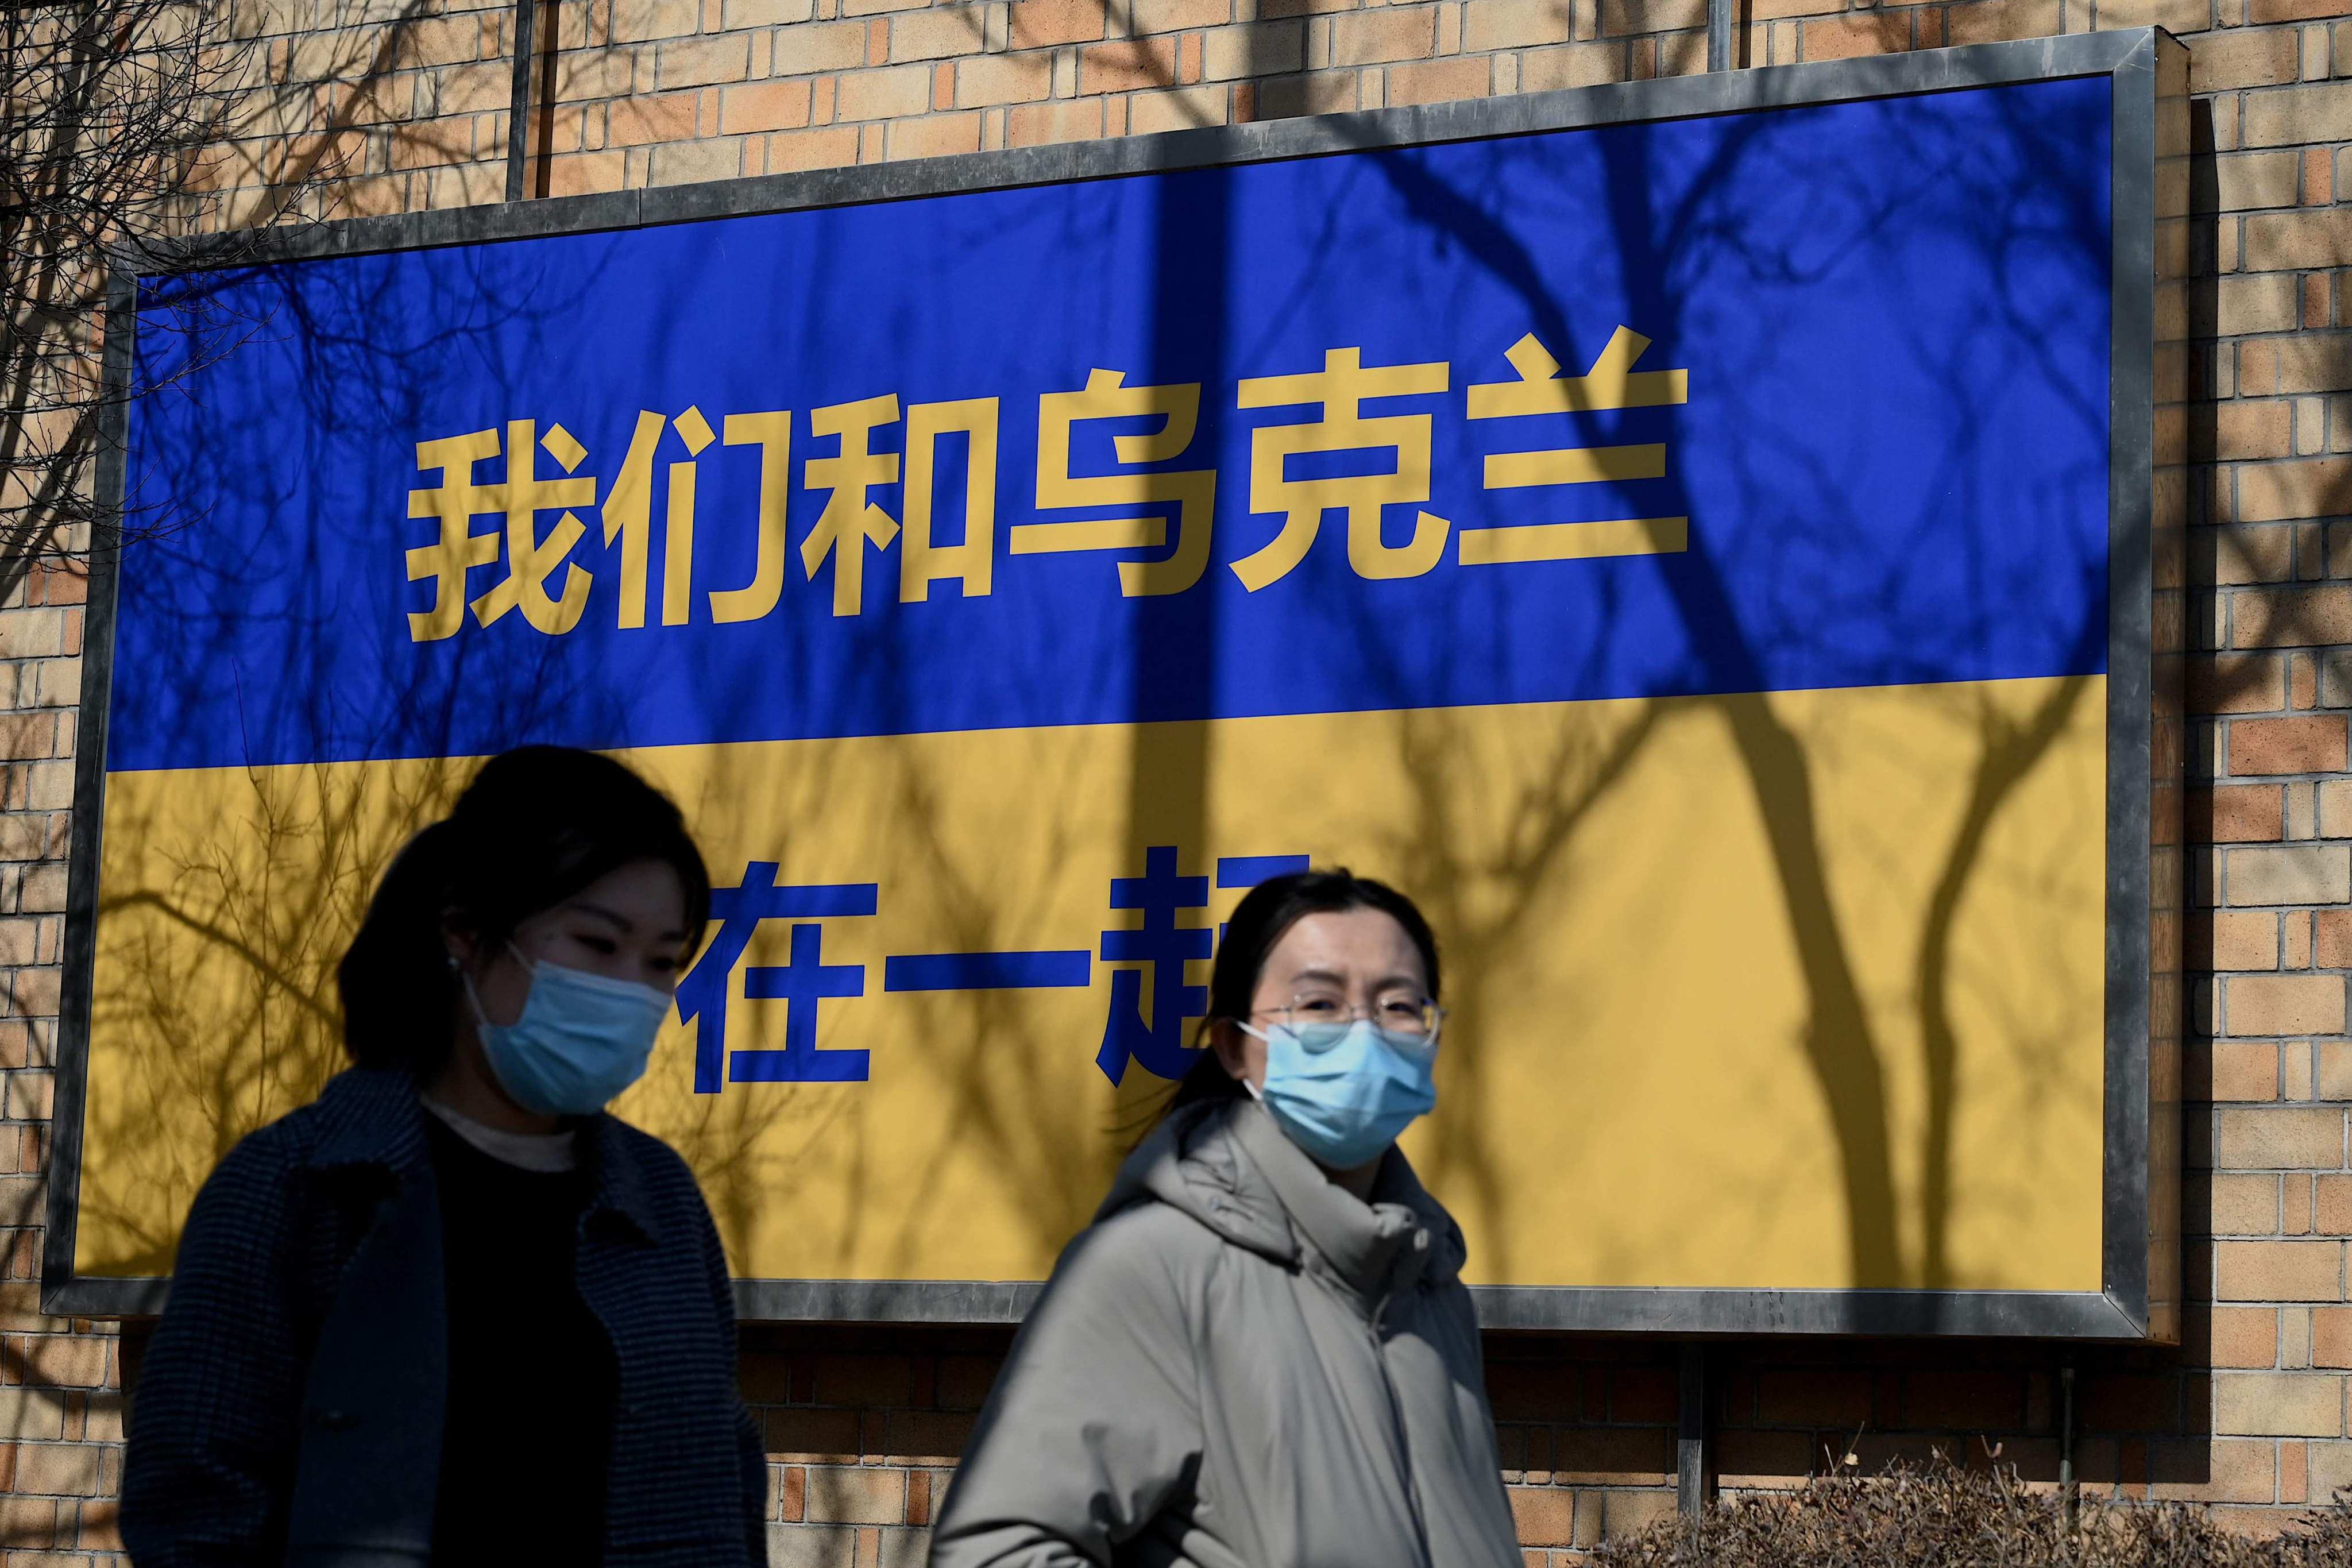 Pedestrians walk past signage in the design of Ukraine’s national flag with the message, “we support Ukraine”, outside the Canadian embassy in Beijing on March 3, 2022. Photo: AFP